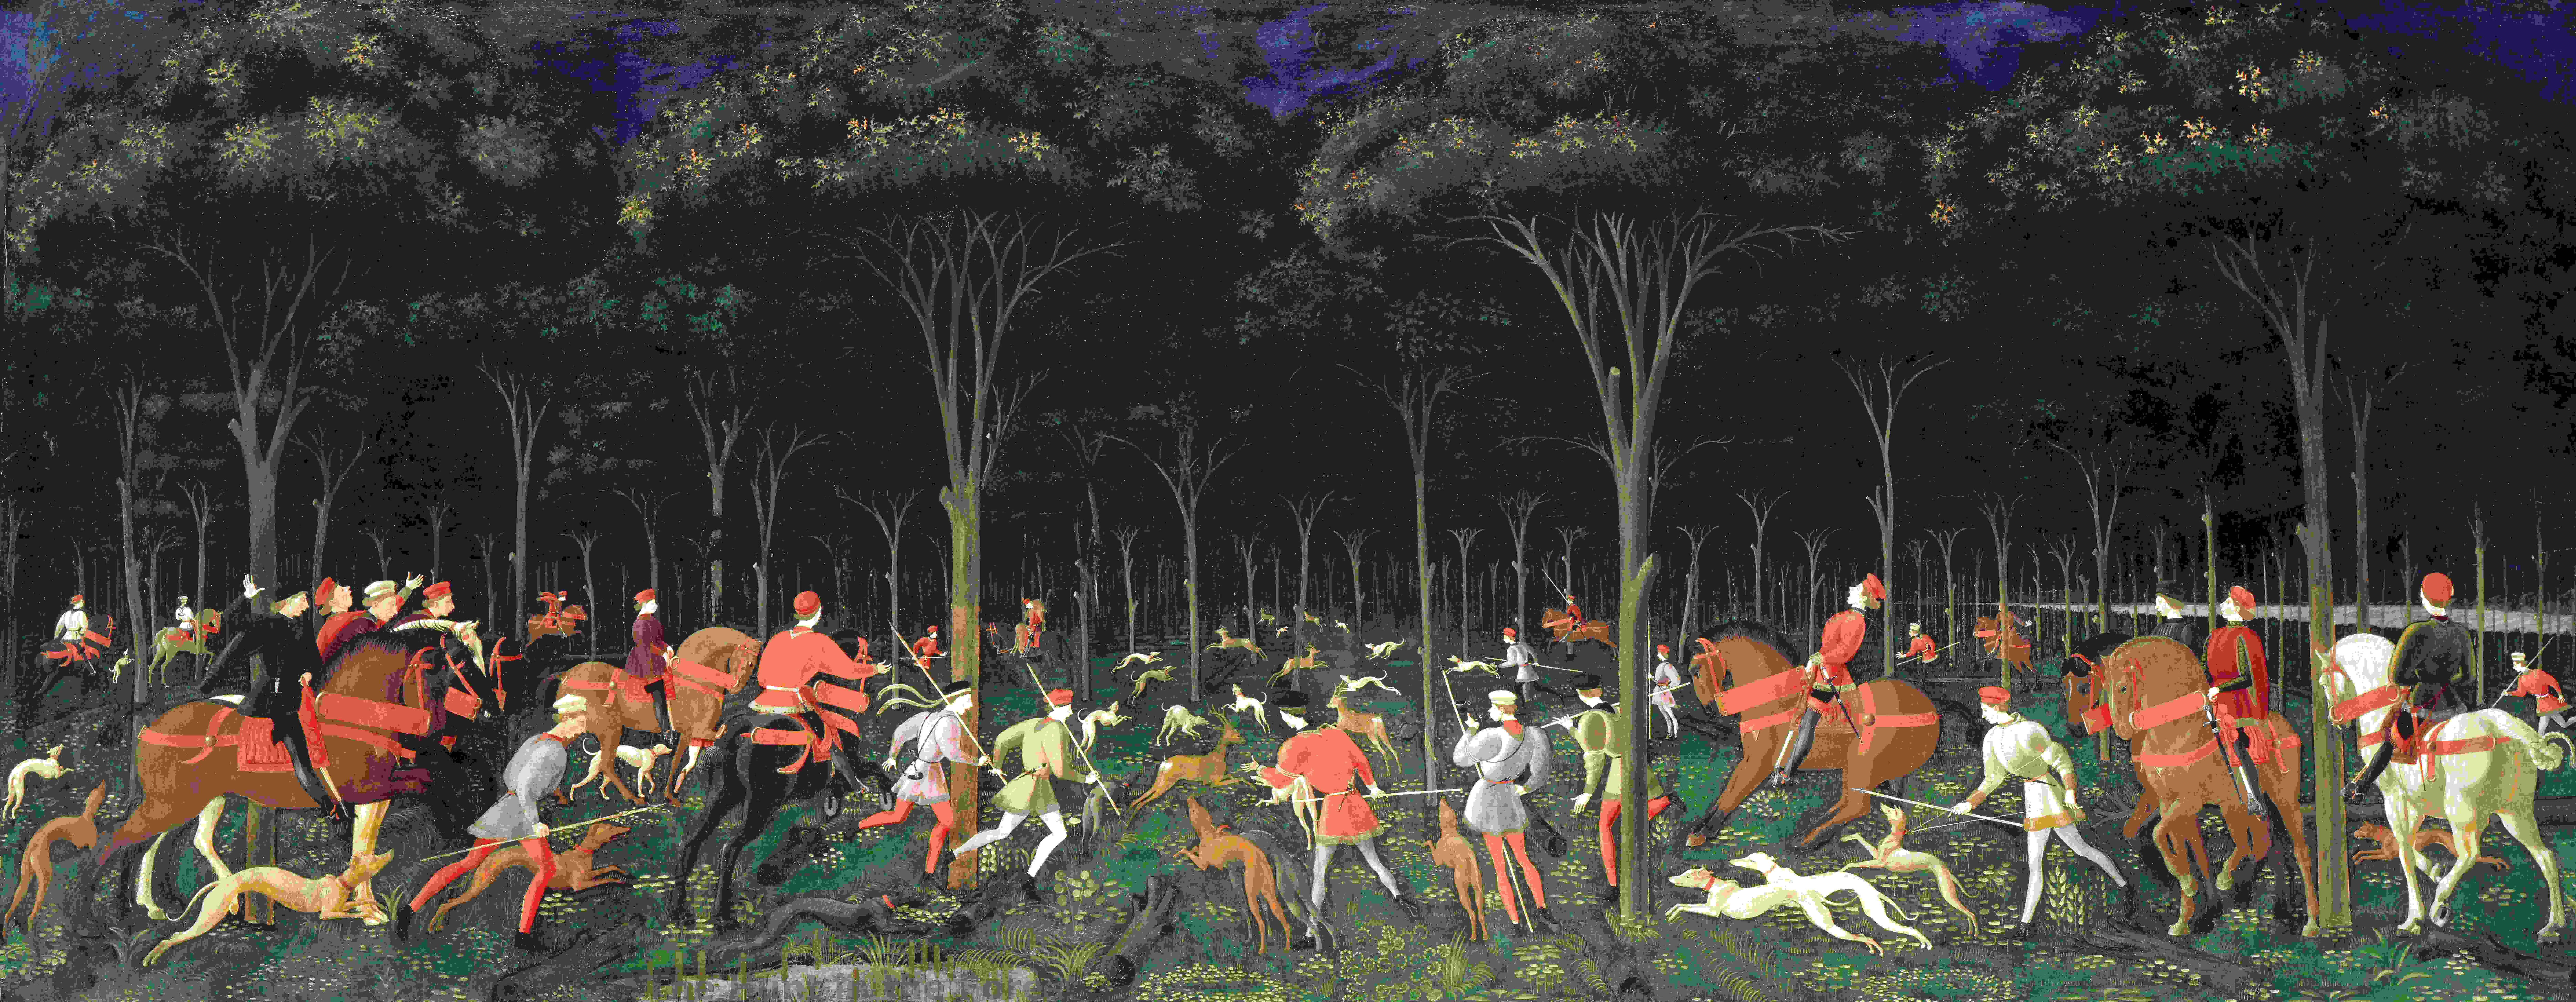 WikiOO.org - Güzel Sanatlar Ansiklopedisi - Resim, Resimler Paolo Uccello - The Hunt in the Forest